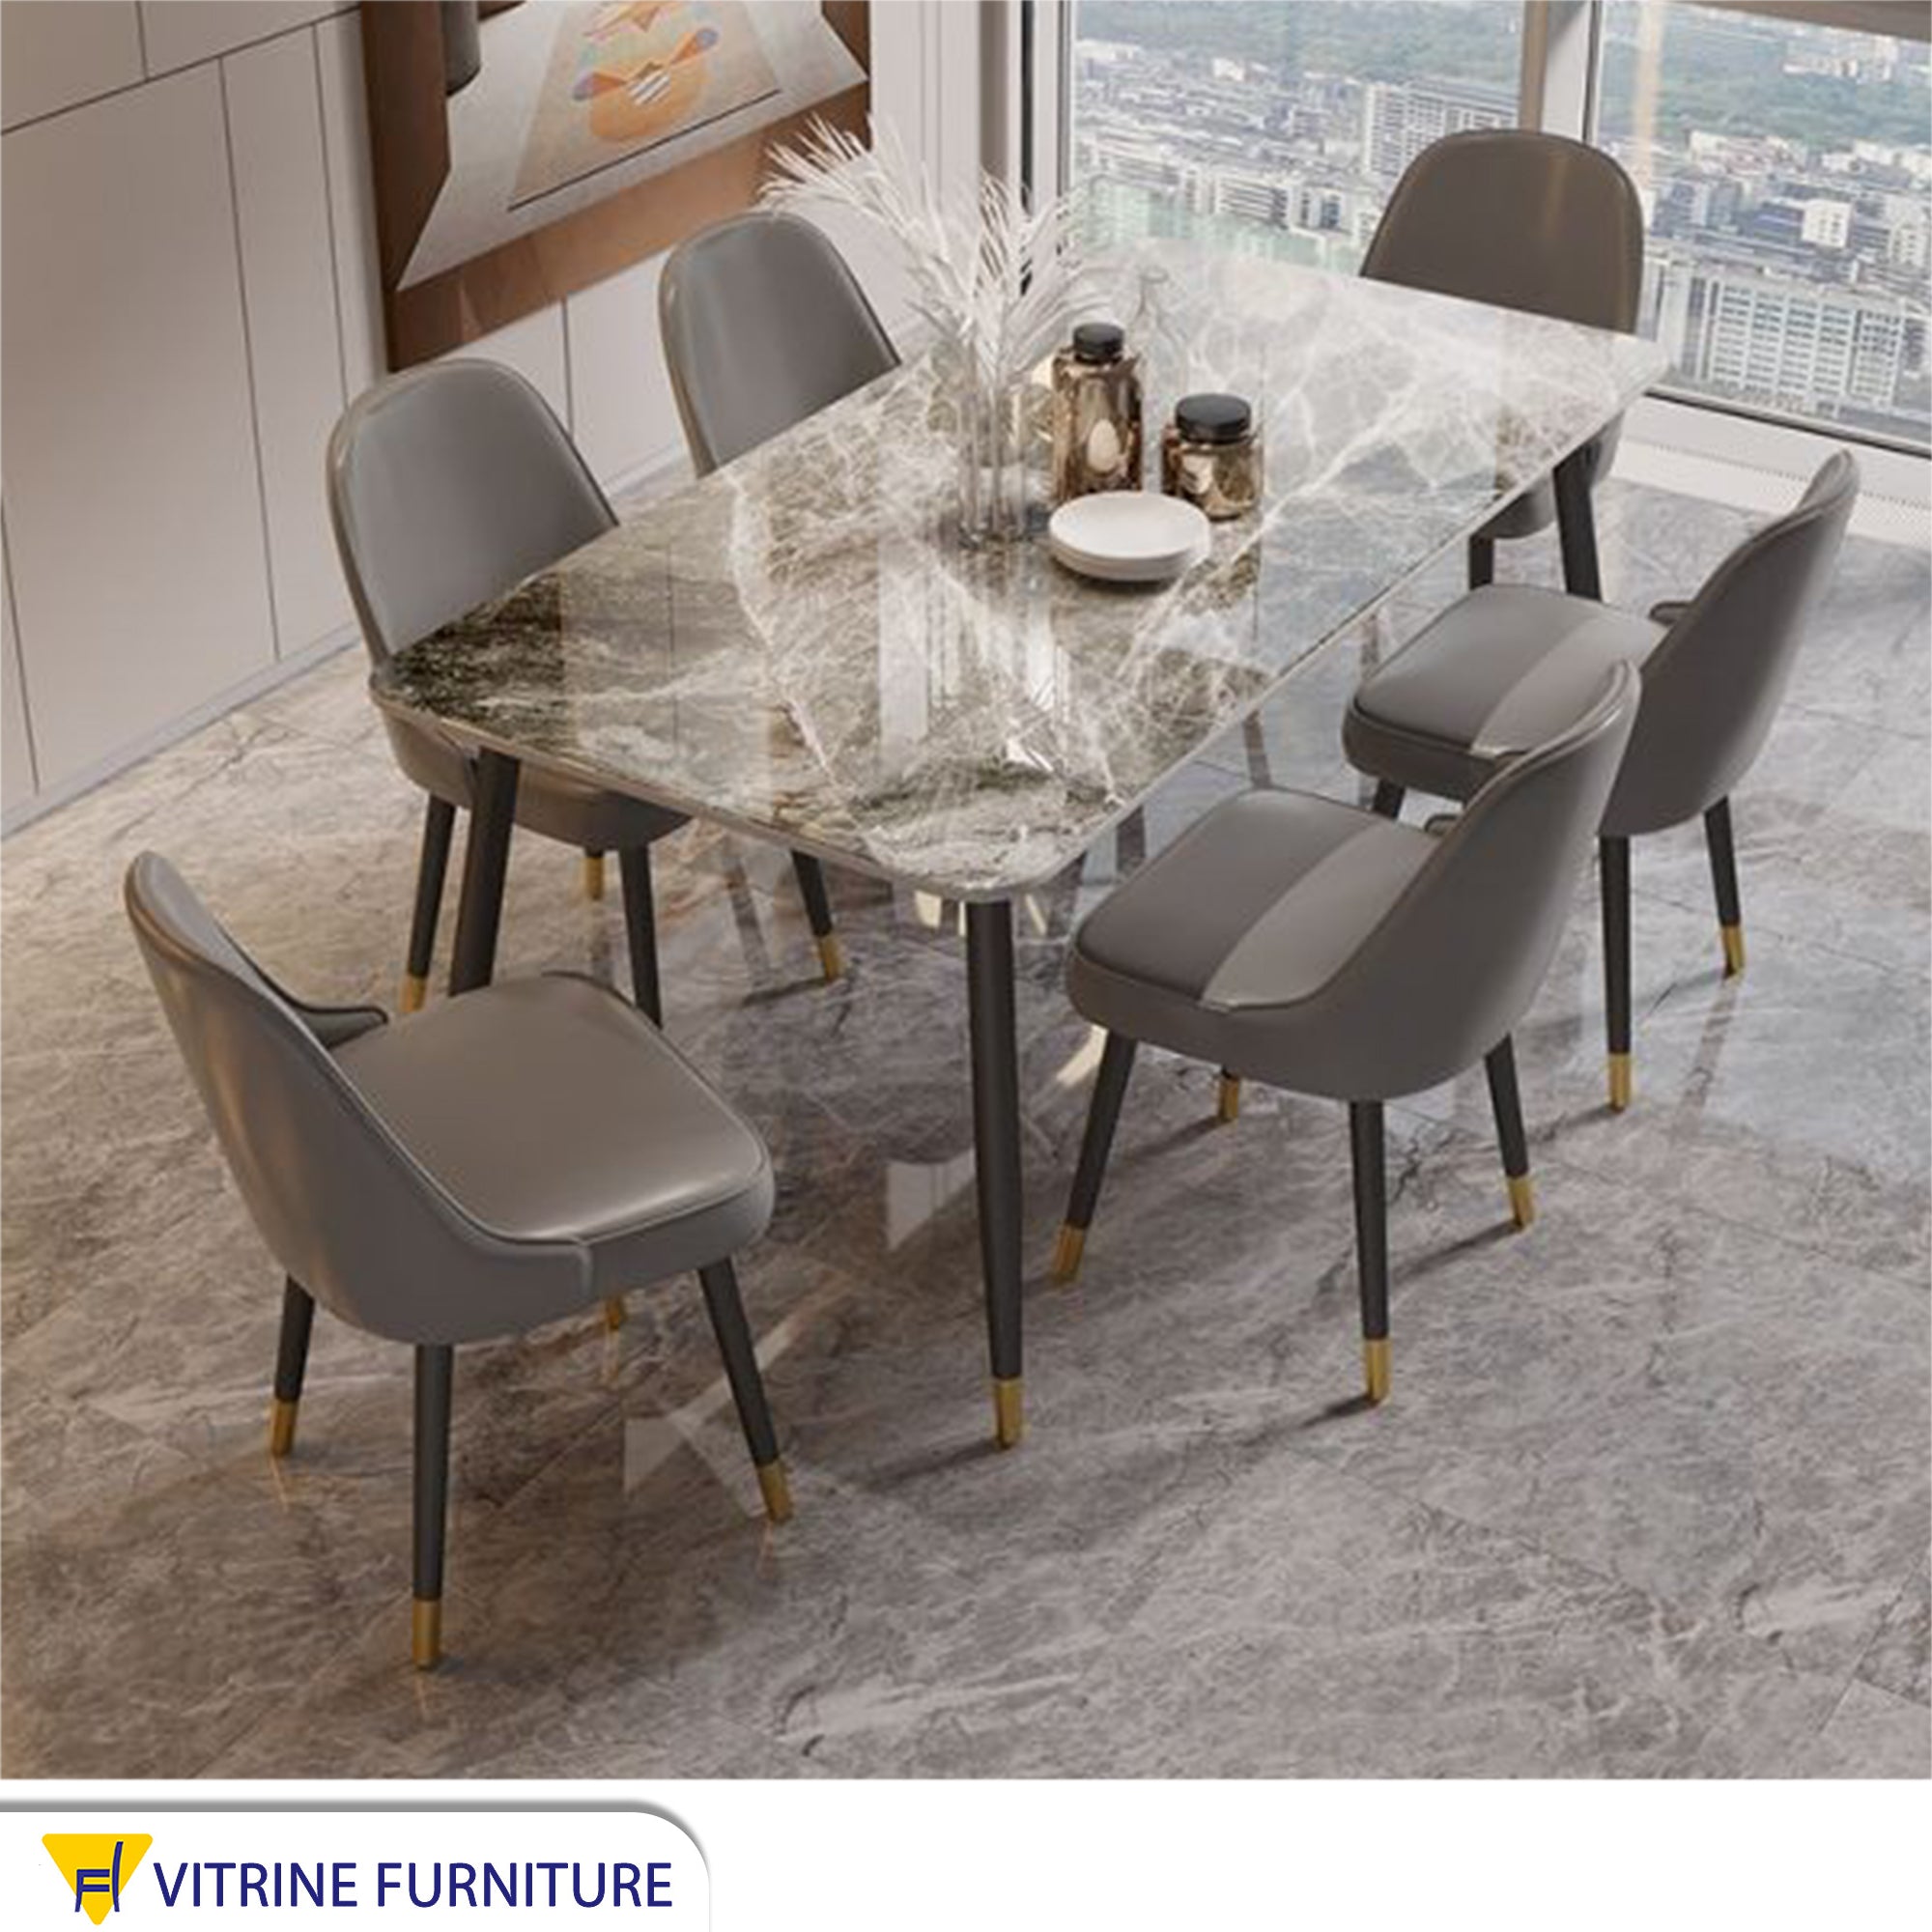 Dining table with 6 grey chairs